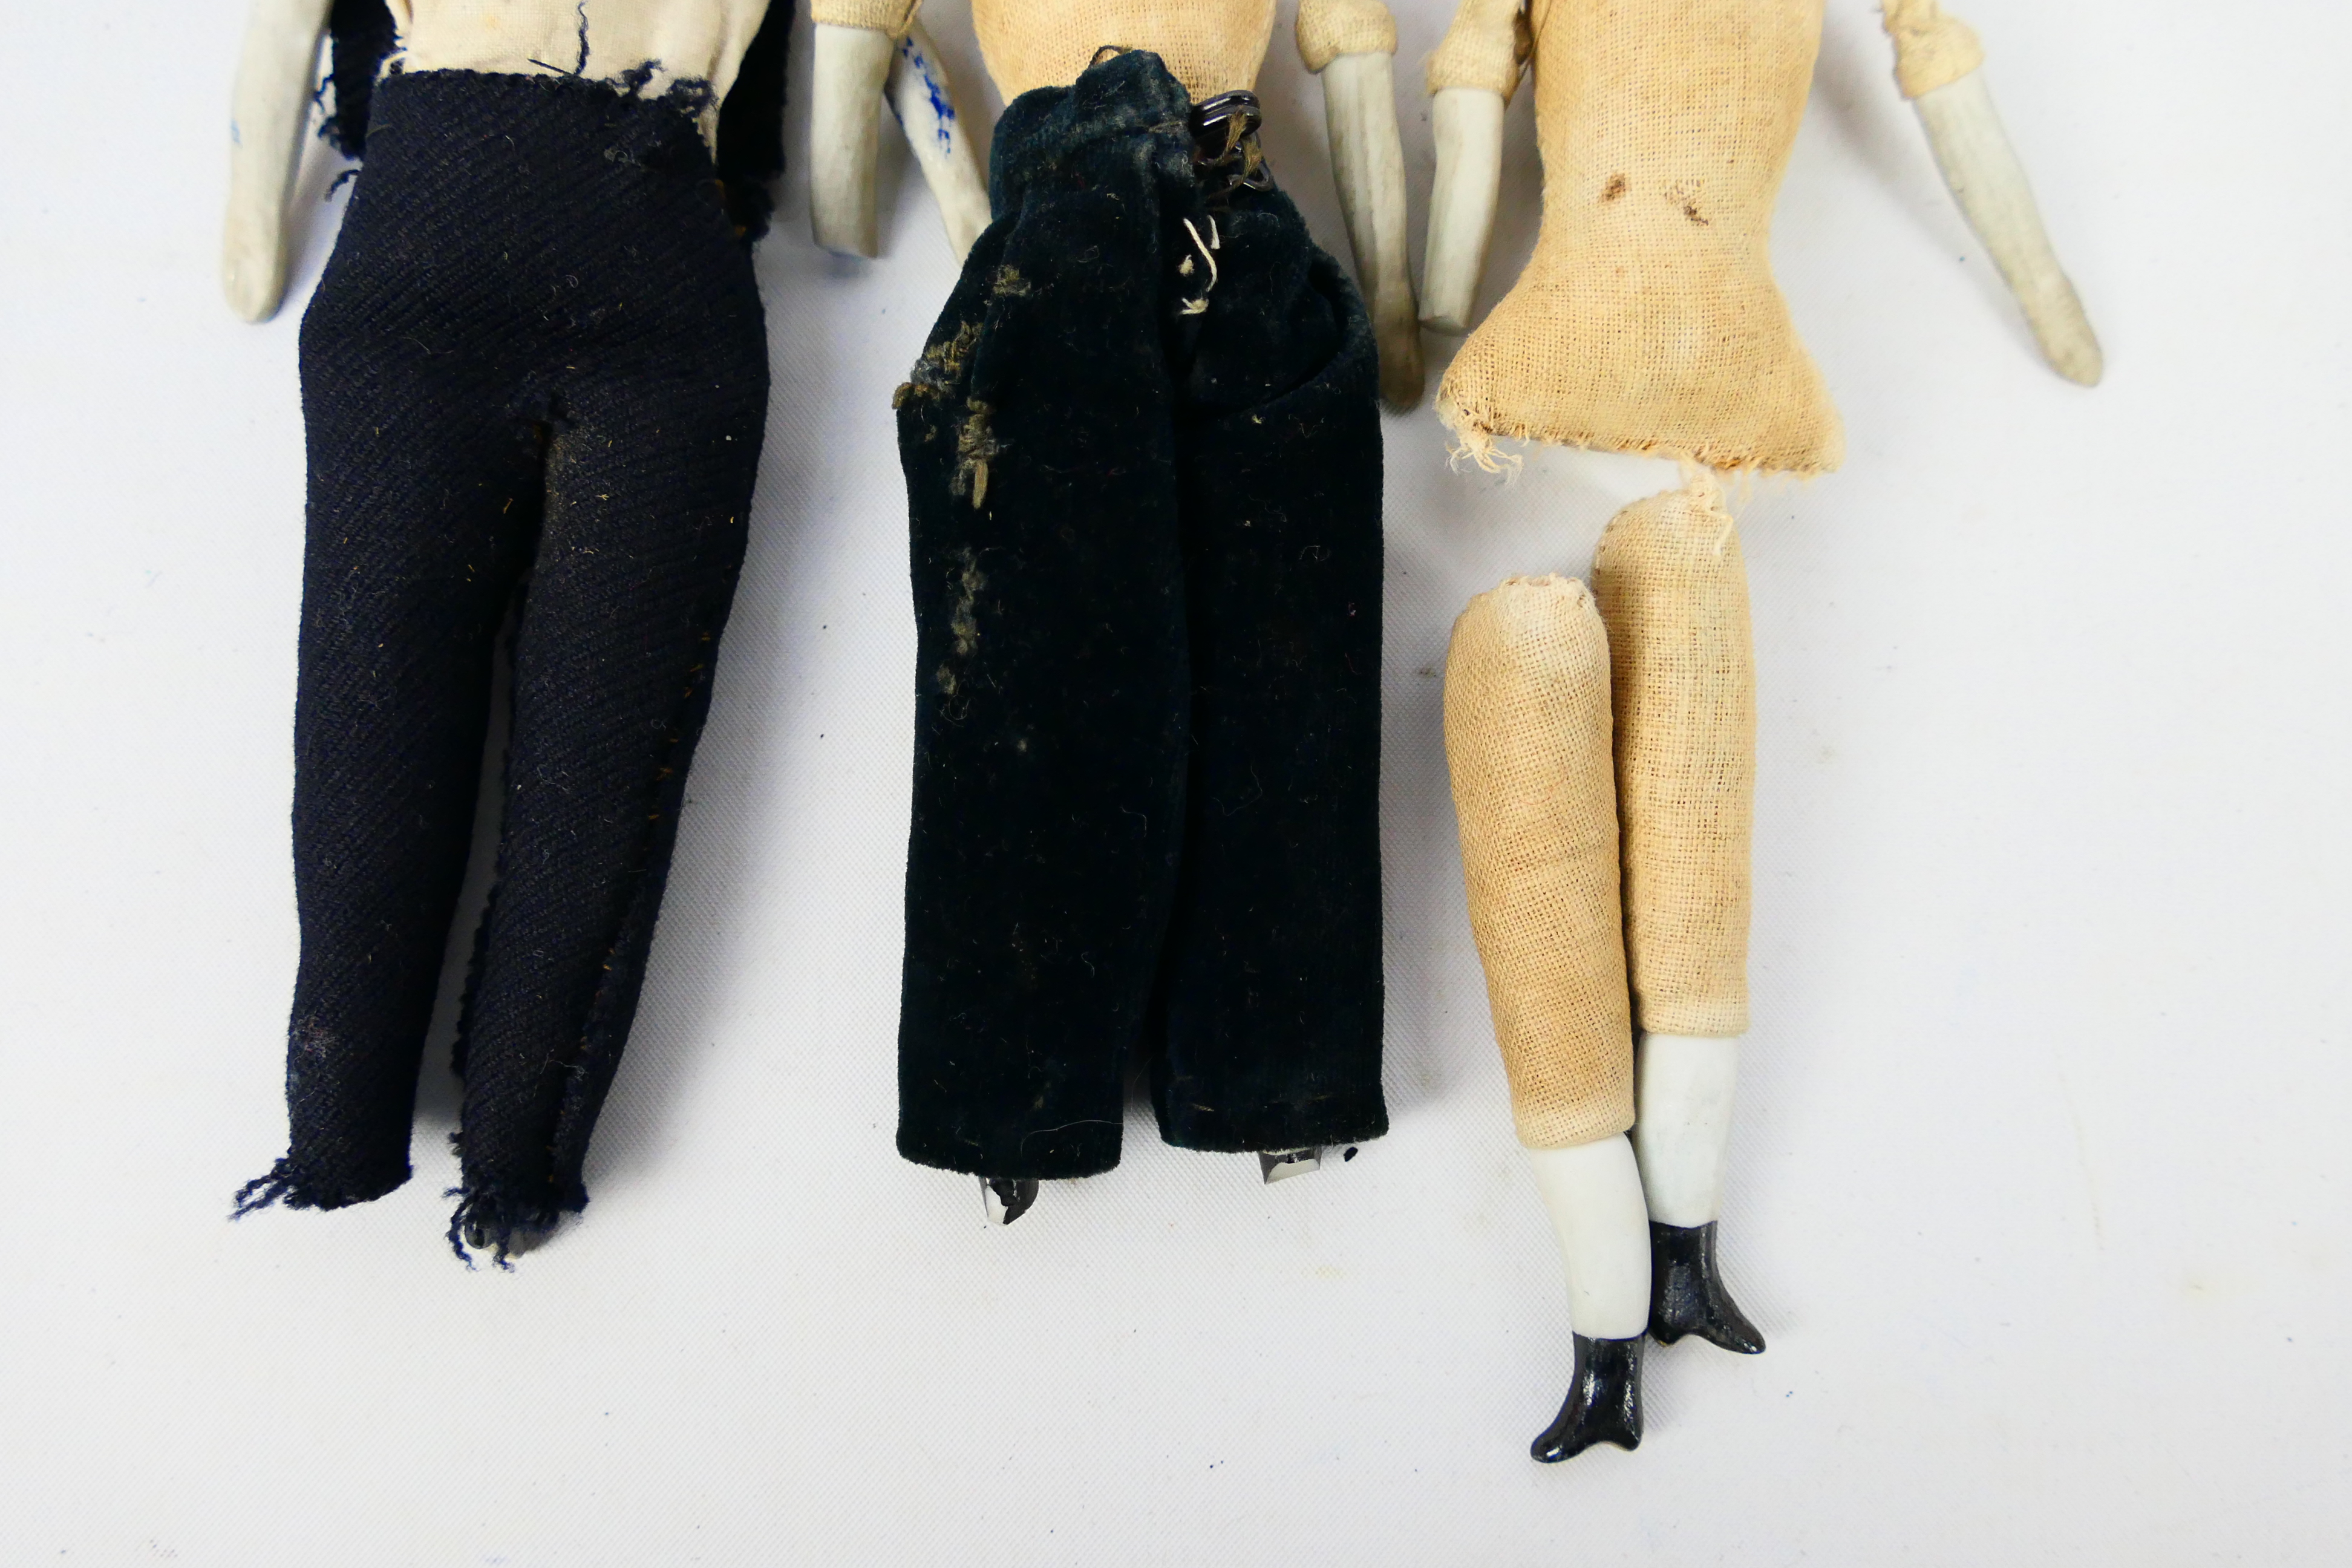 Bisque Male Dolls - 3 x bearded dolls with bisque heads, shoulders and lower limbs and cloth bodies. - Image 9 of 9